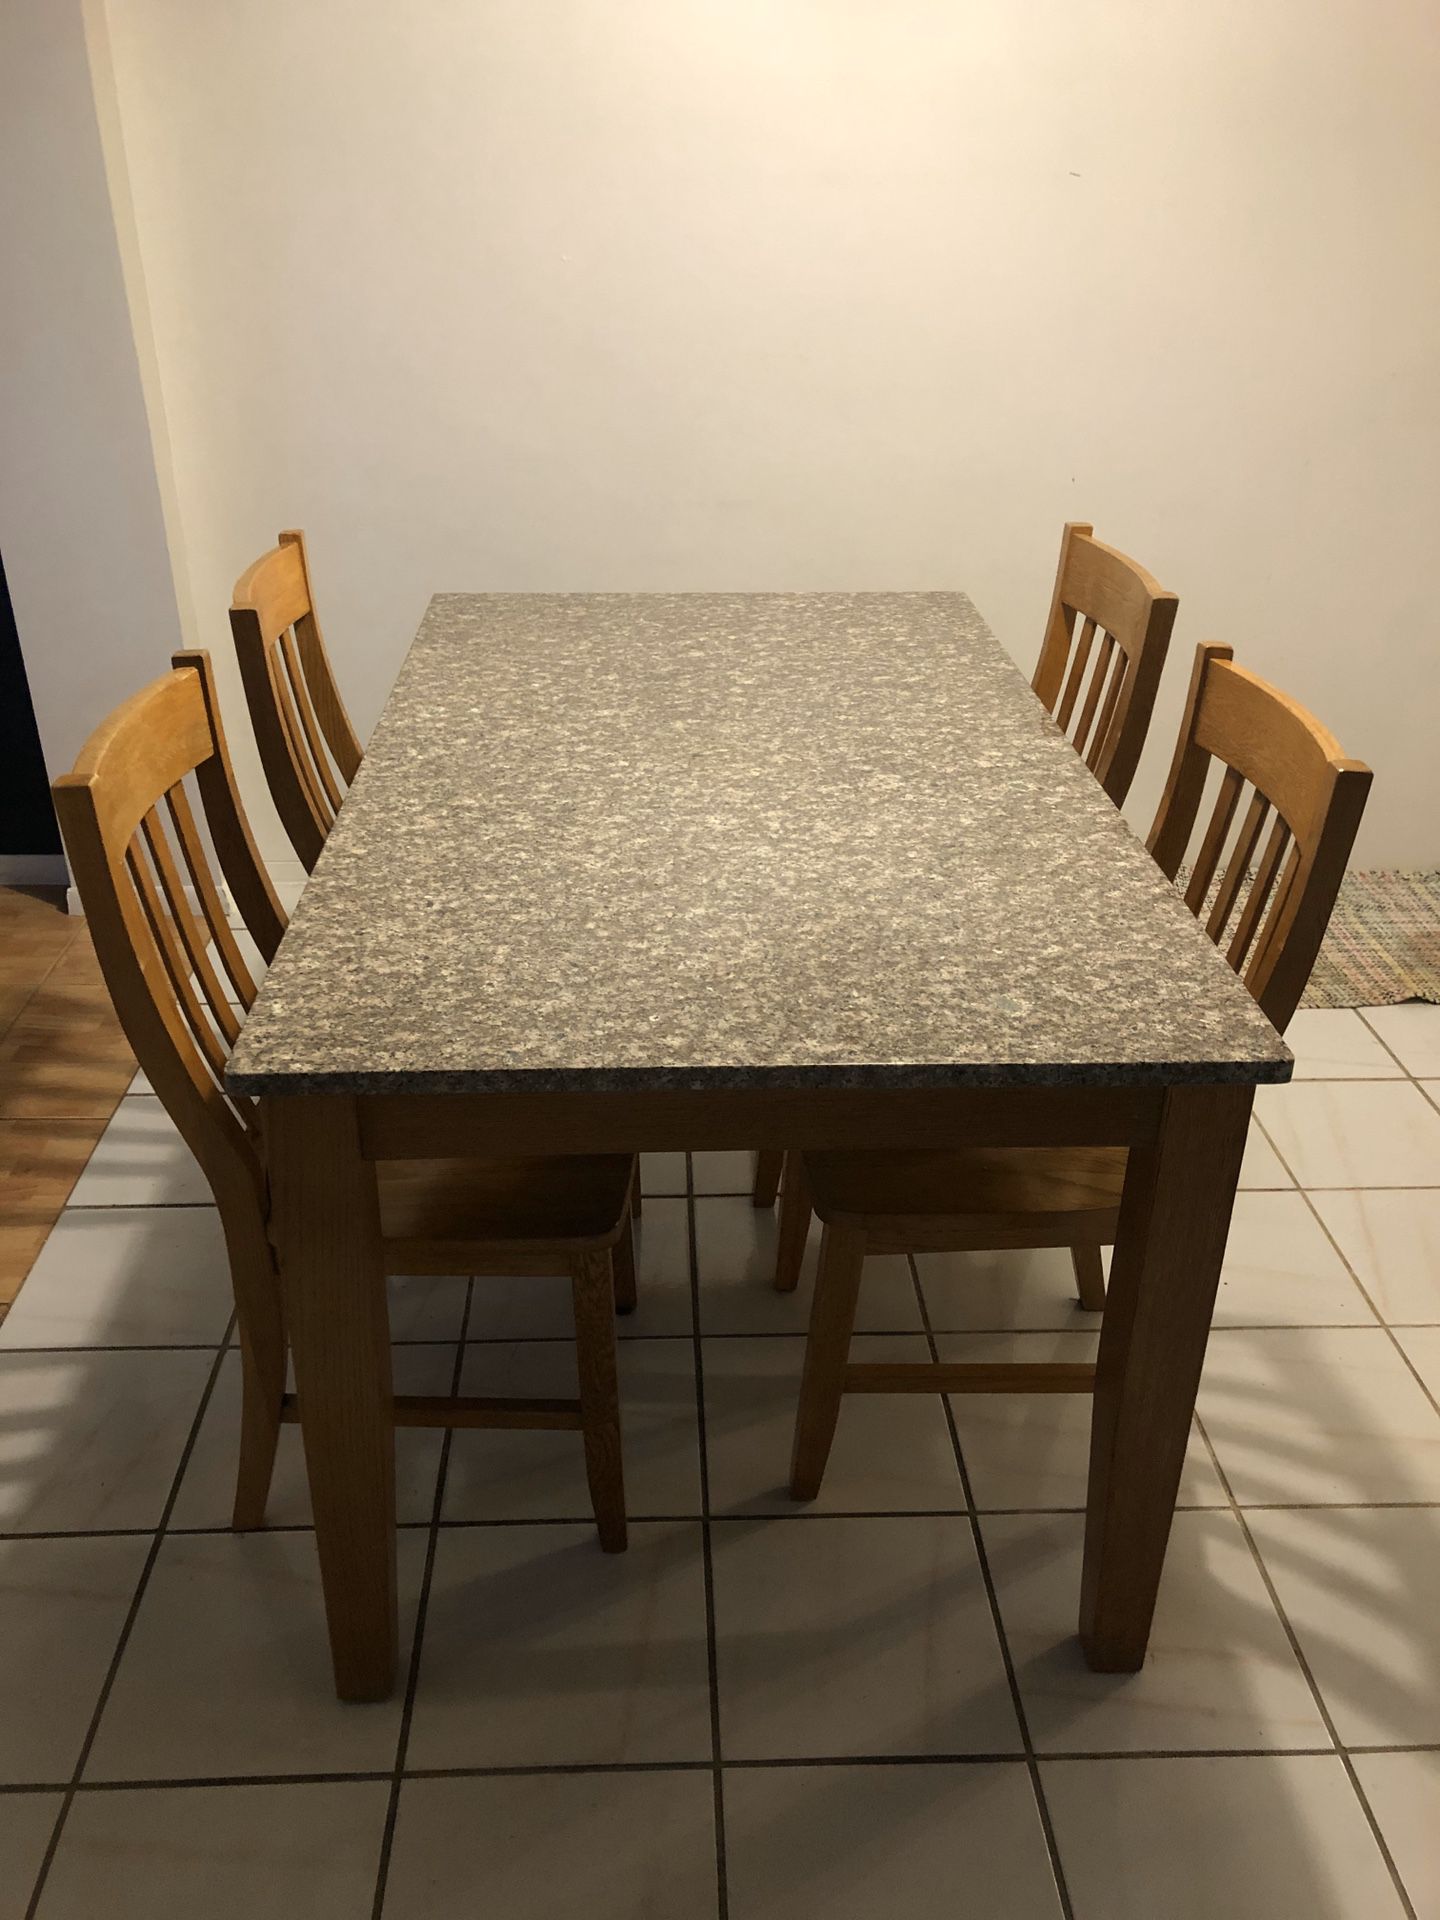 Real stone marble/wood table with chairs